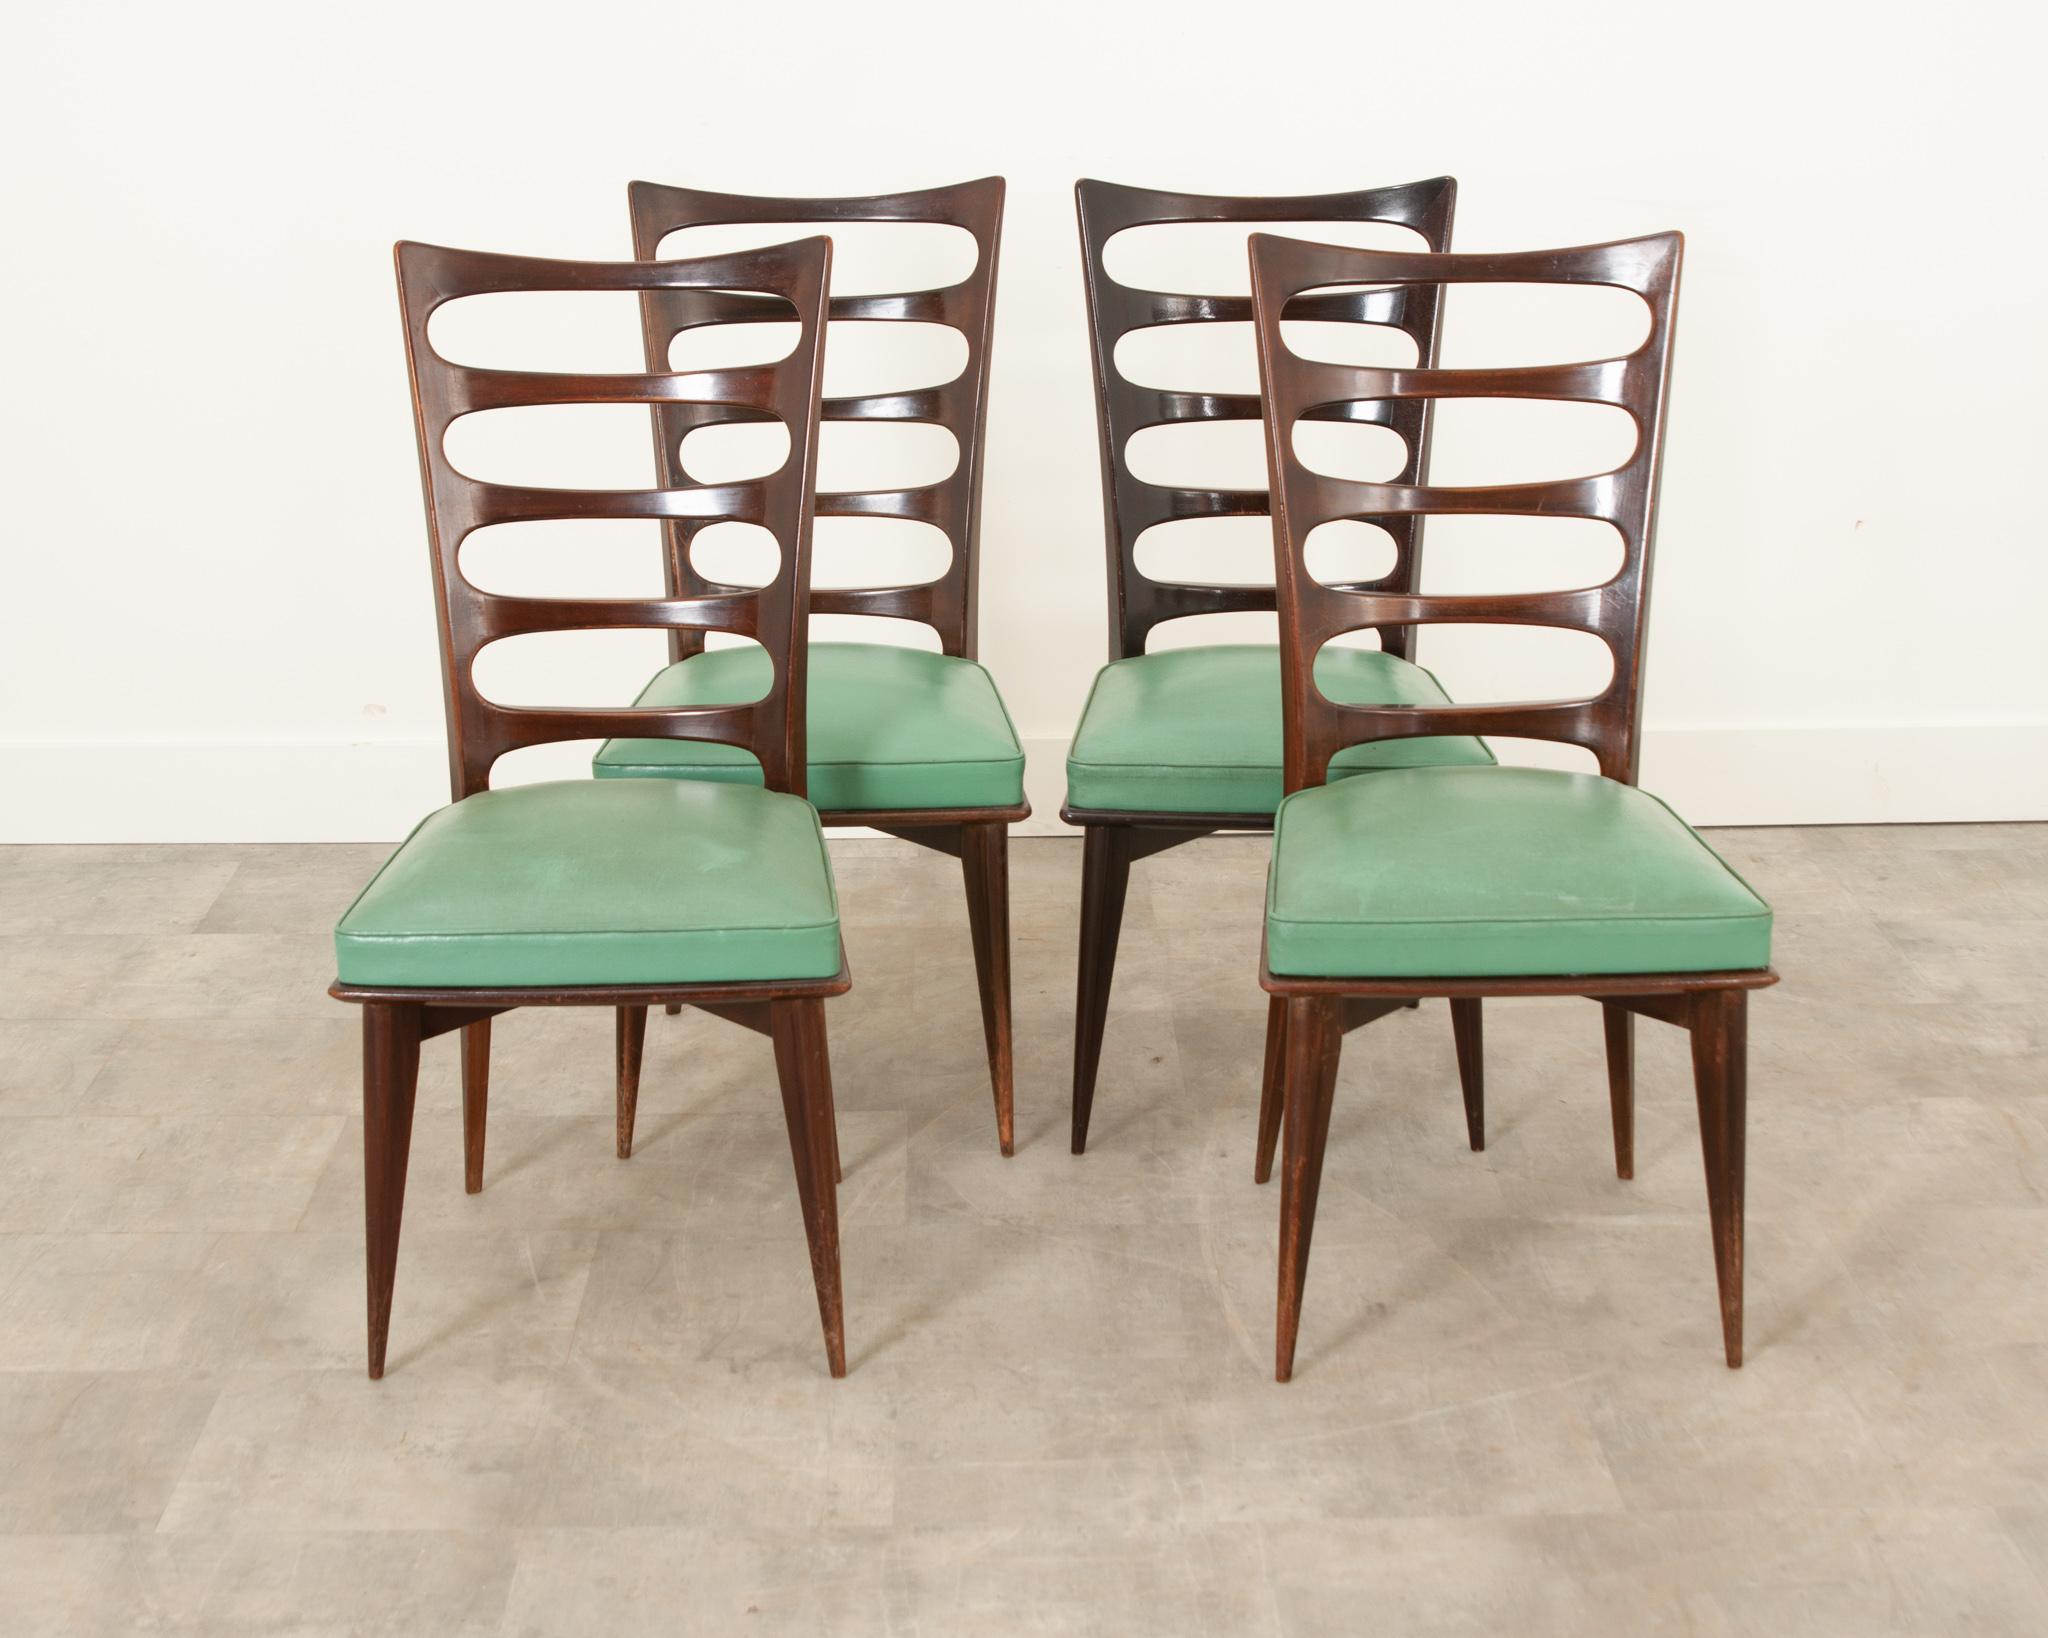 This fine and stylish set of four of mid-century modern mahogany dining chairs are by Gaston Poisson, c. 1960’s, France, and are covered in a teal leatherette that would blend beautifully into almost any color scheme. Seat height: 19″